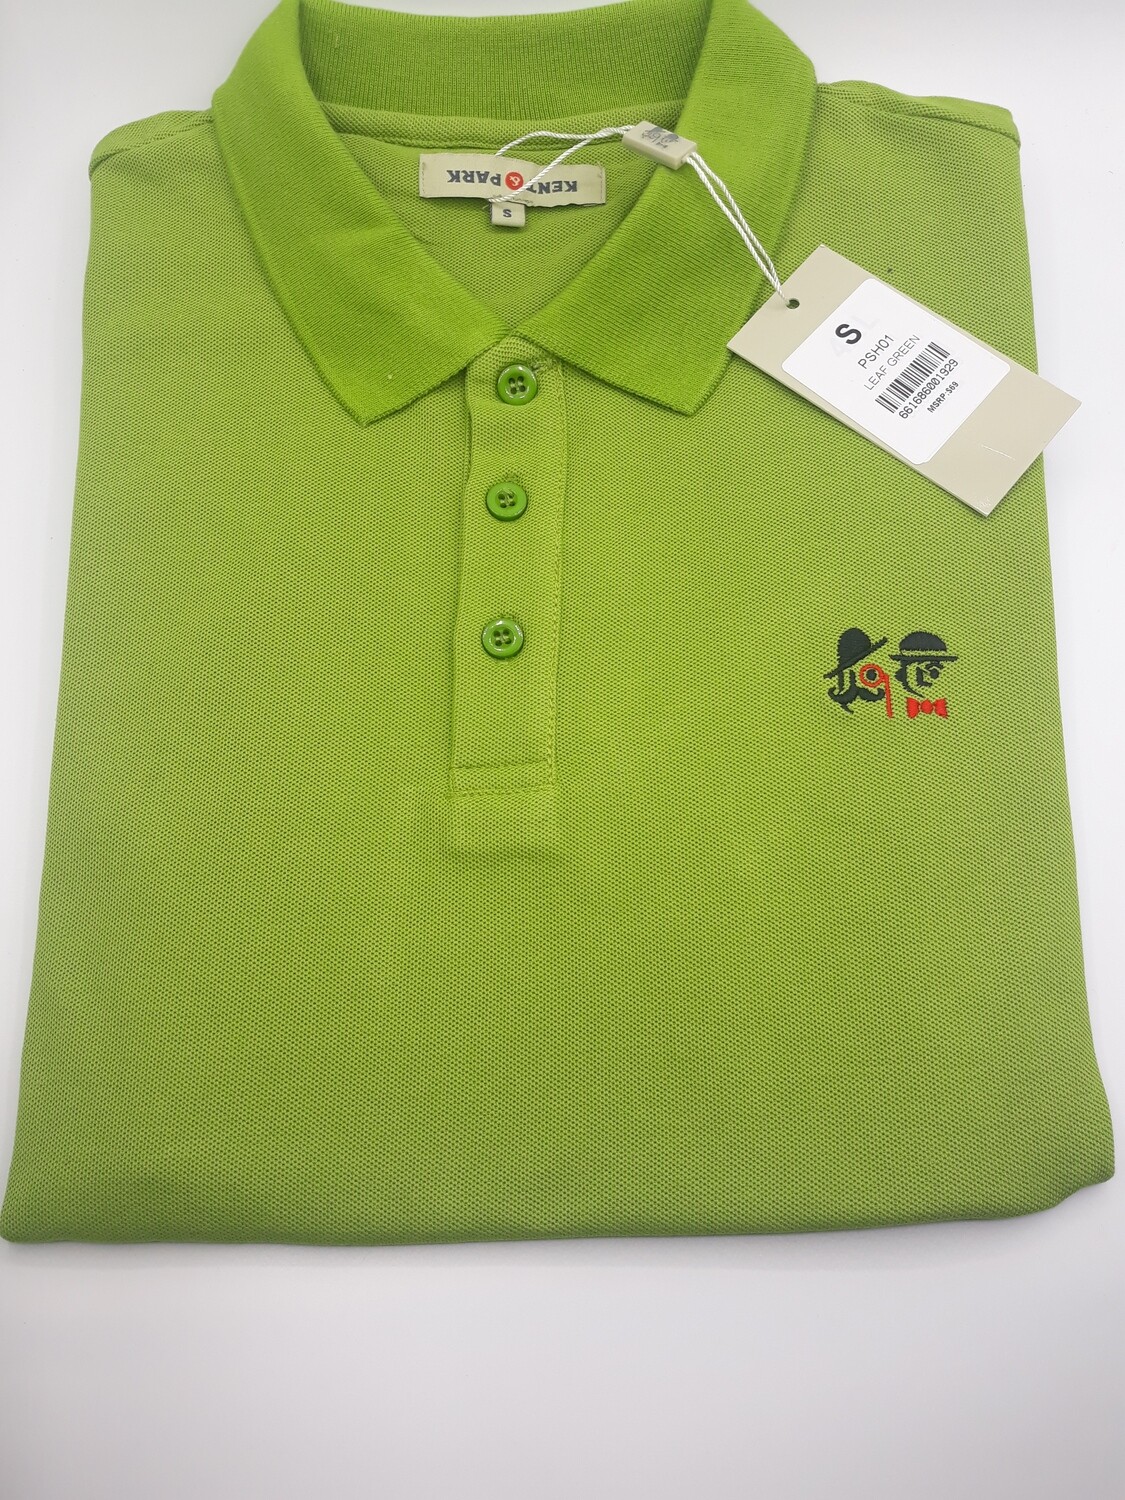 Kent&amp;Park Polo Shirts By Ejsamuels (Green), polo: Small